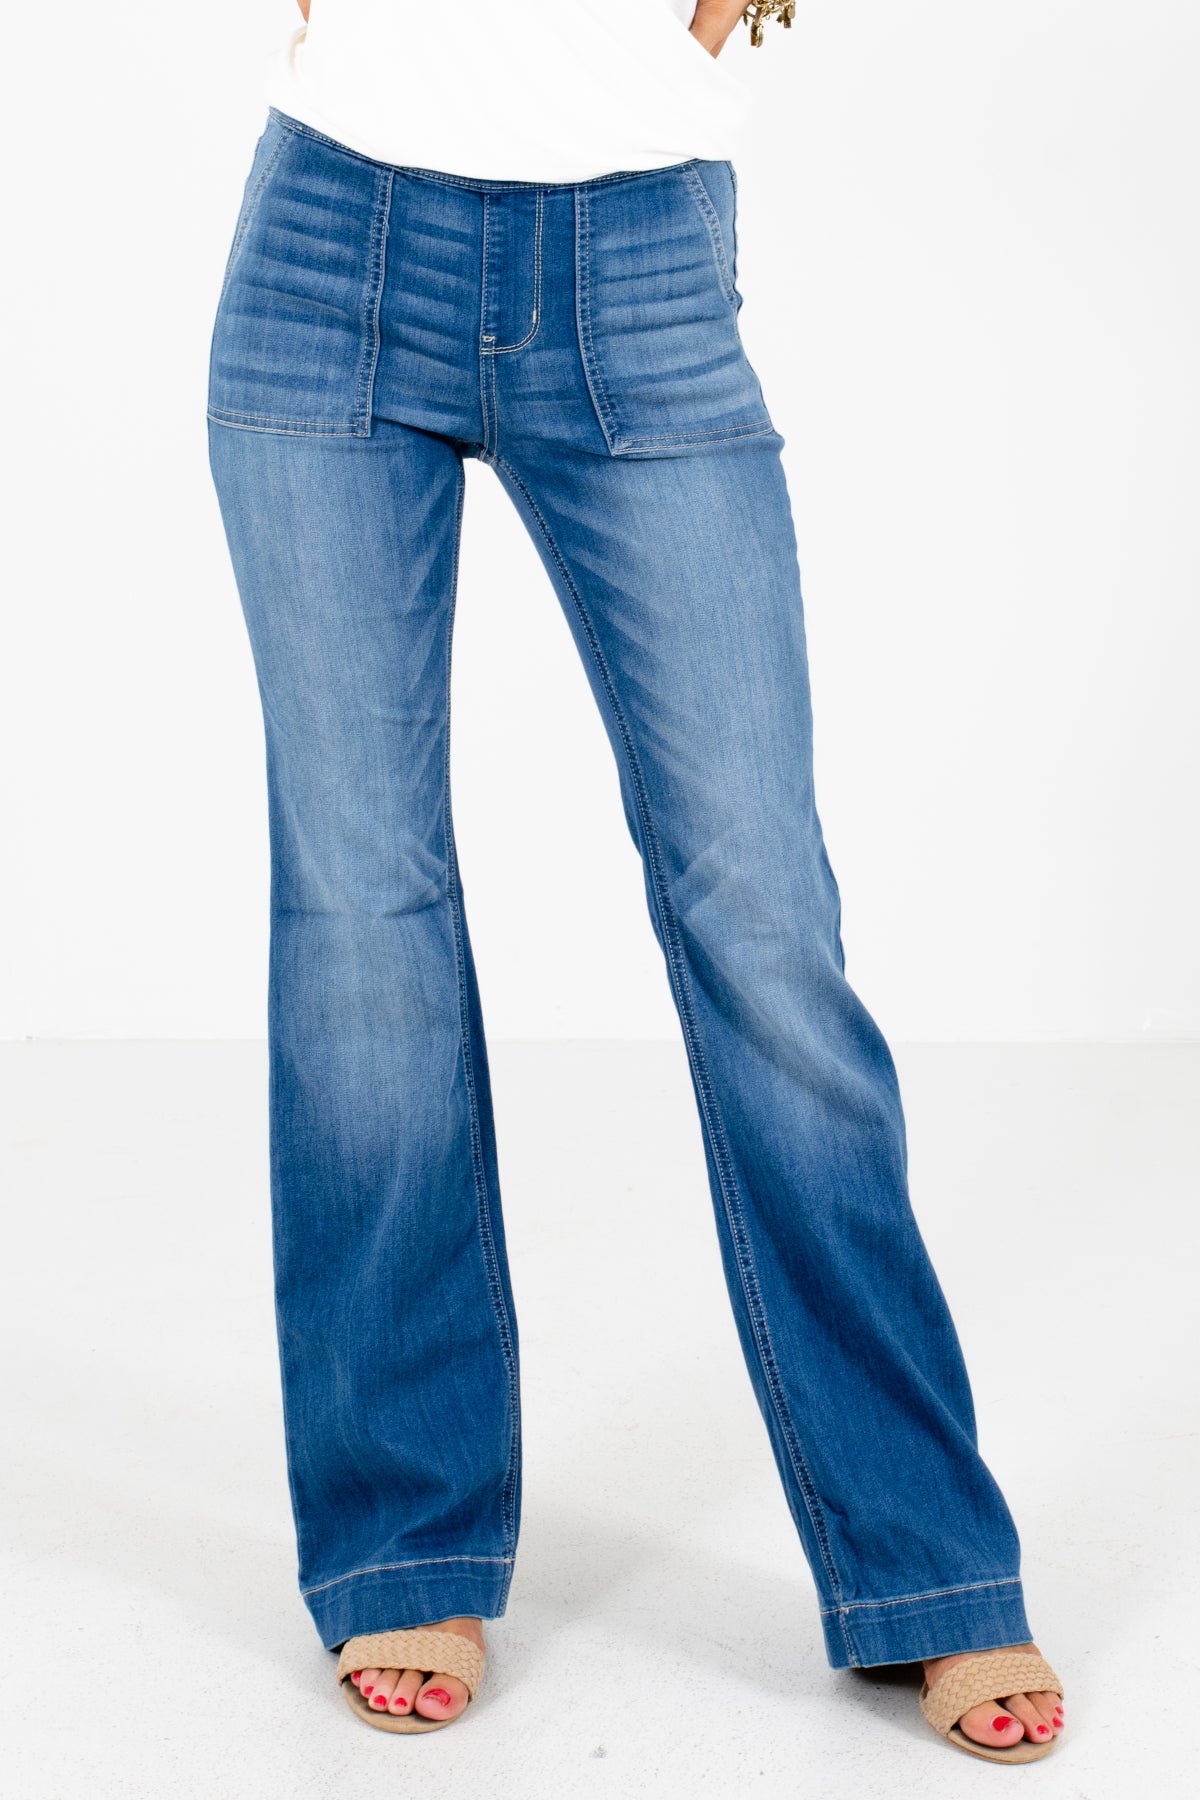 Blue Flare Style Boutique Jeggings for Women